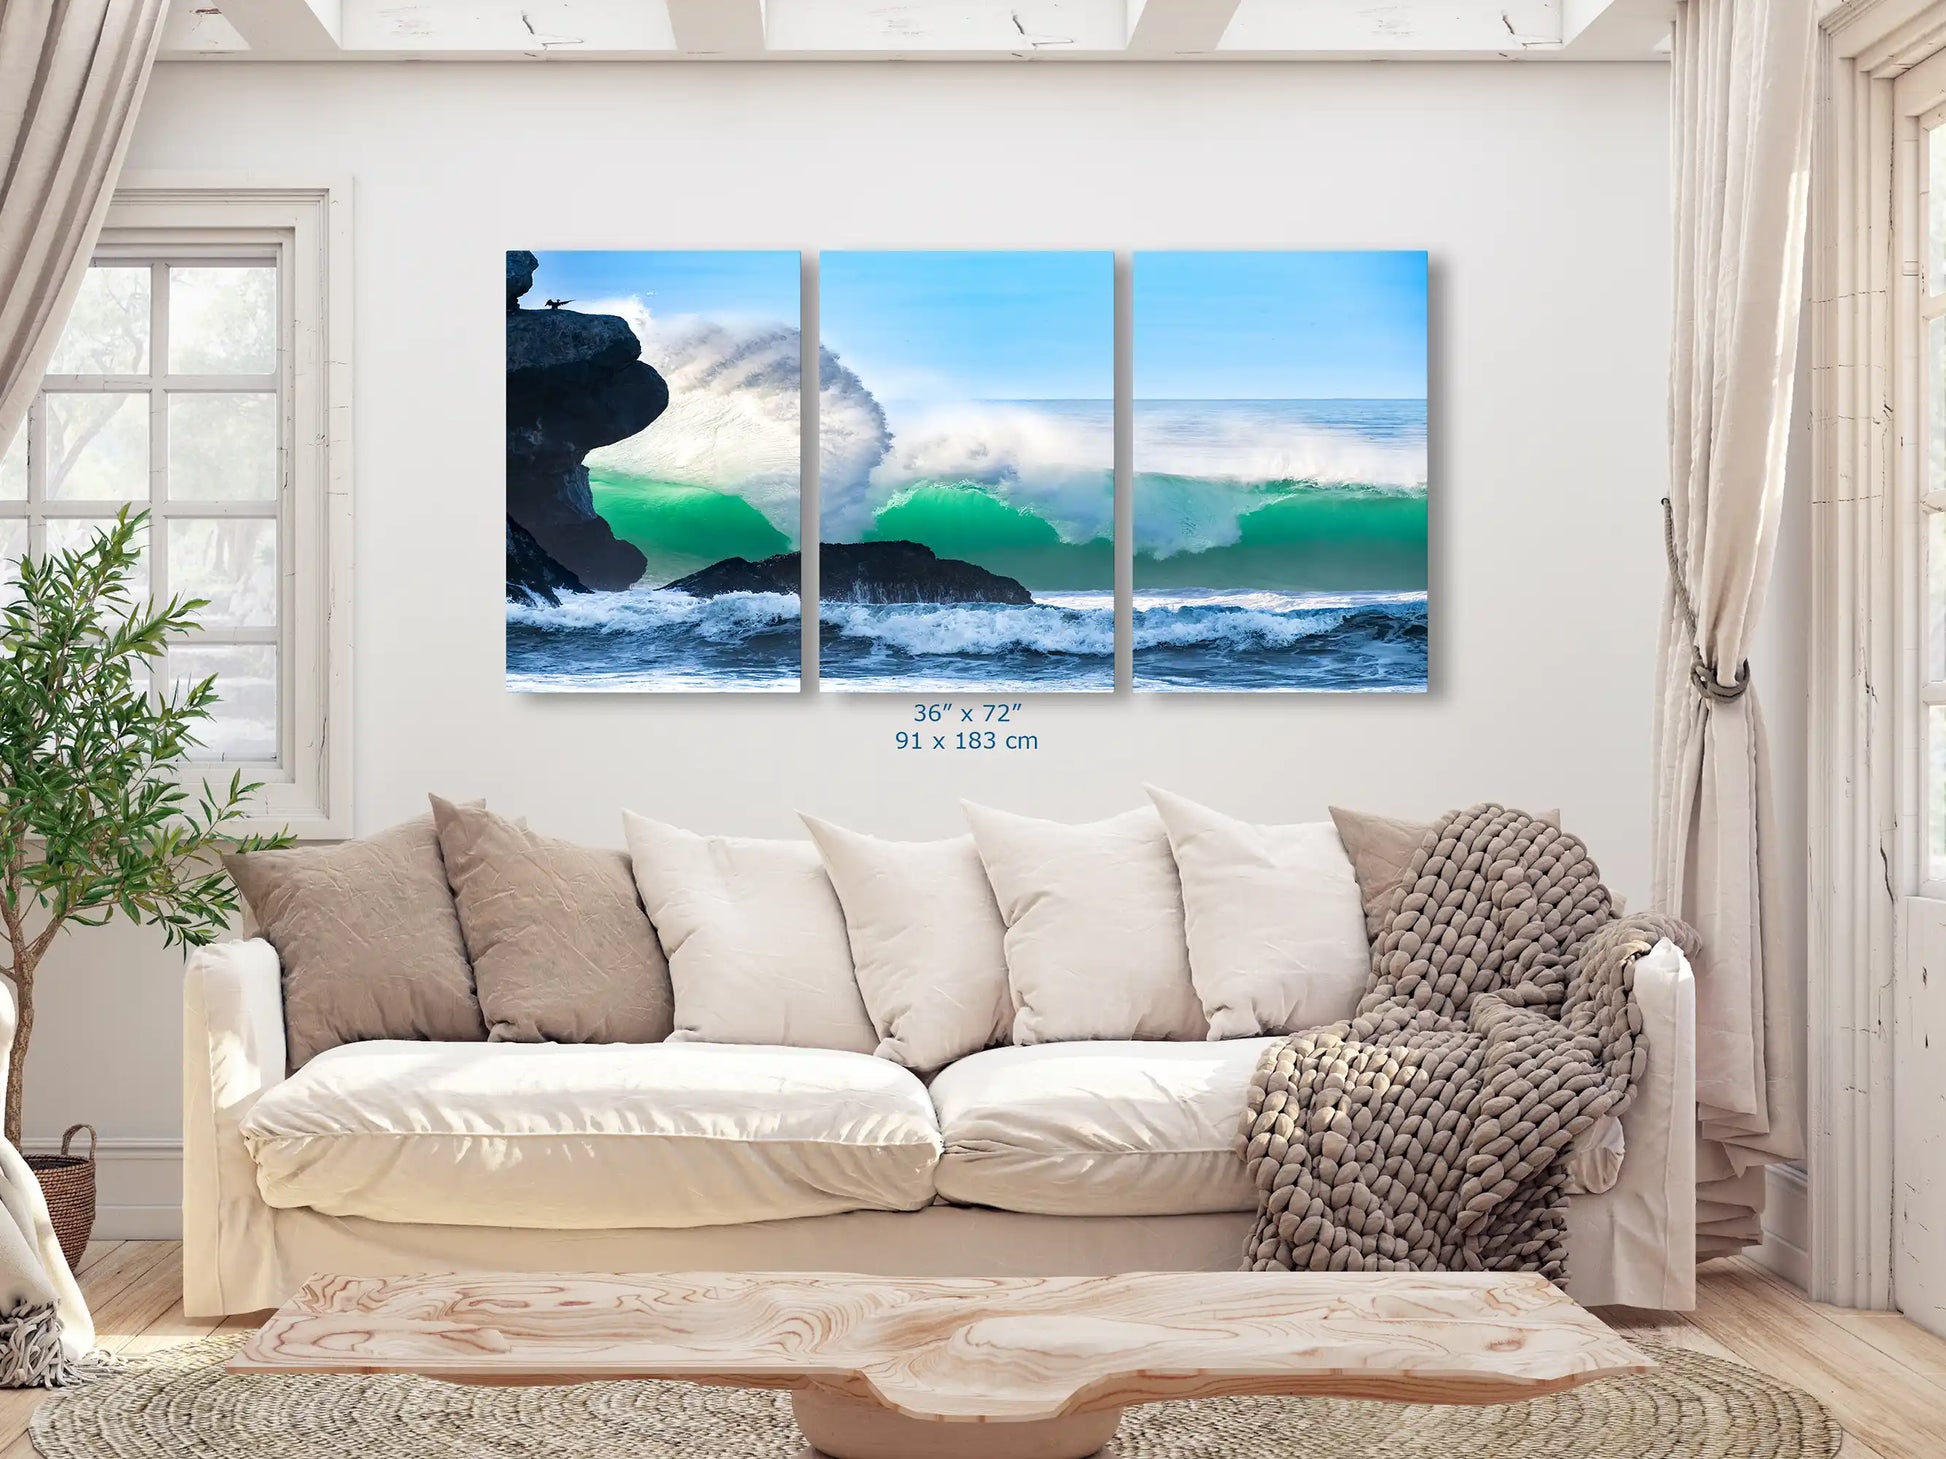 A 36"x72" oversized canvas print of a dramatic ocean wave at Morro Rock, serving as an impressive centerpiece in a living room.